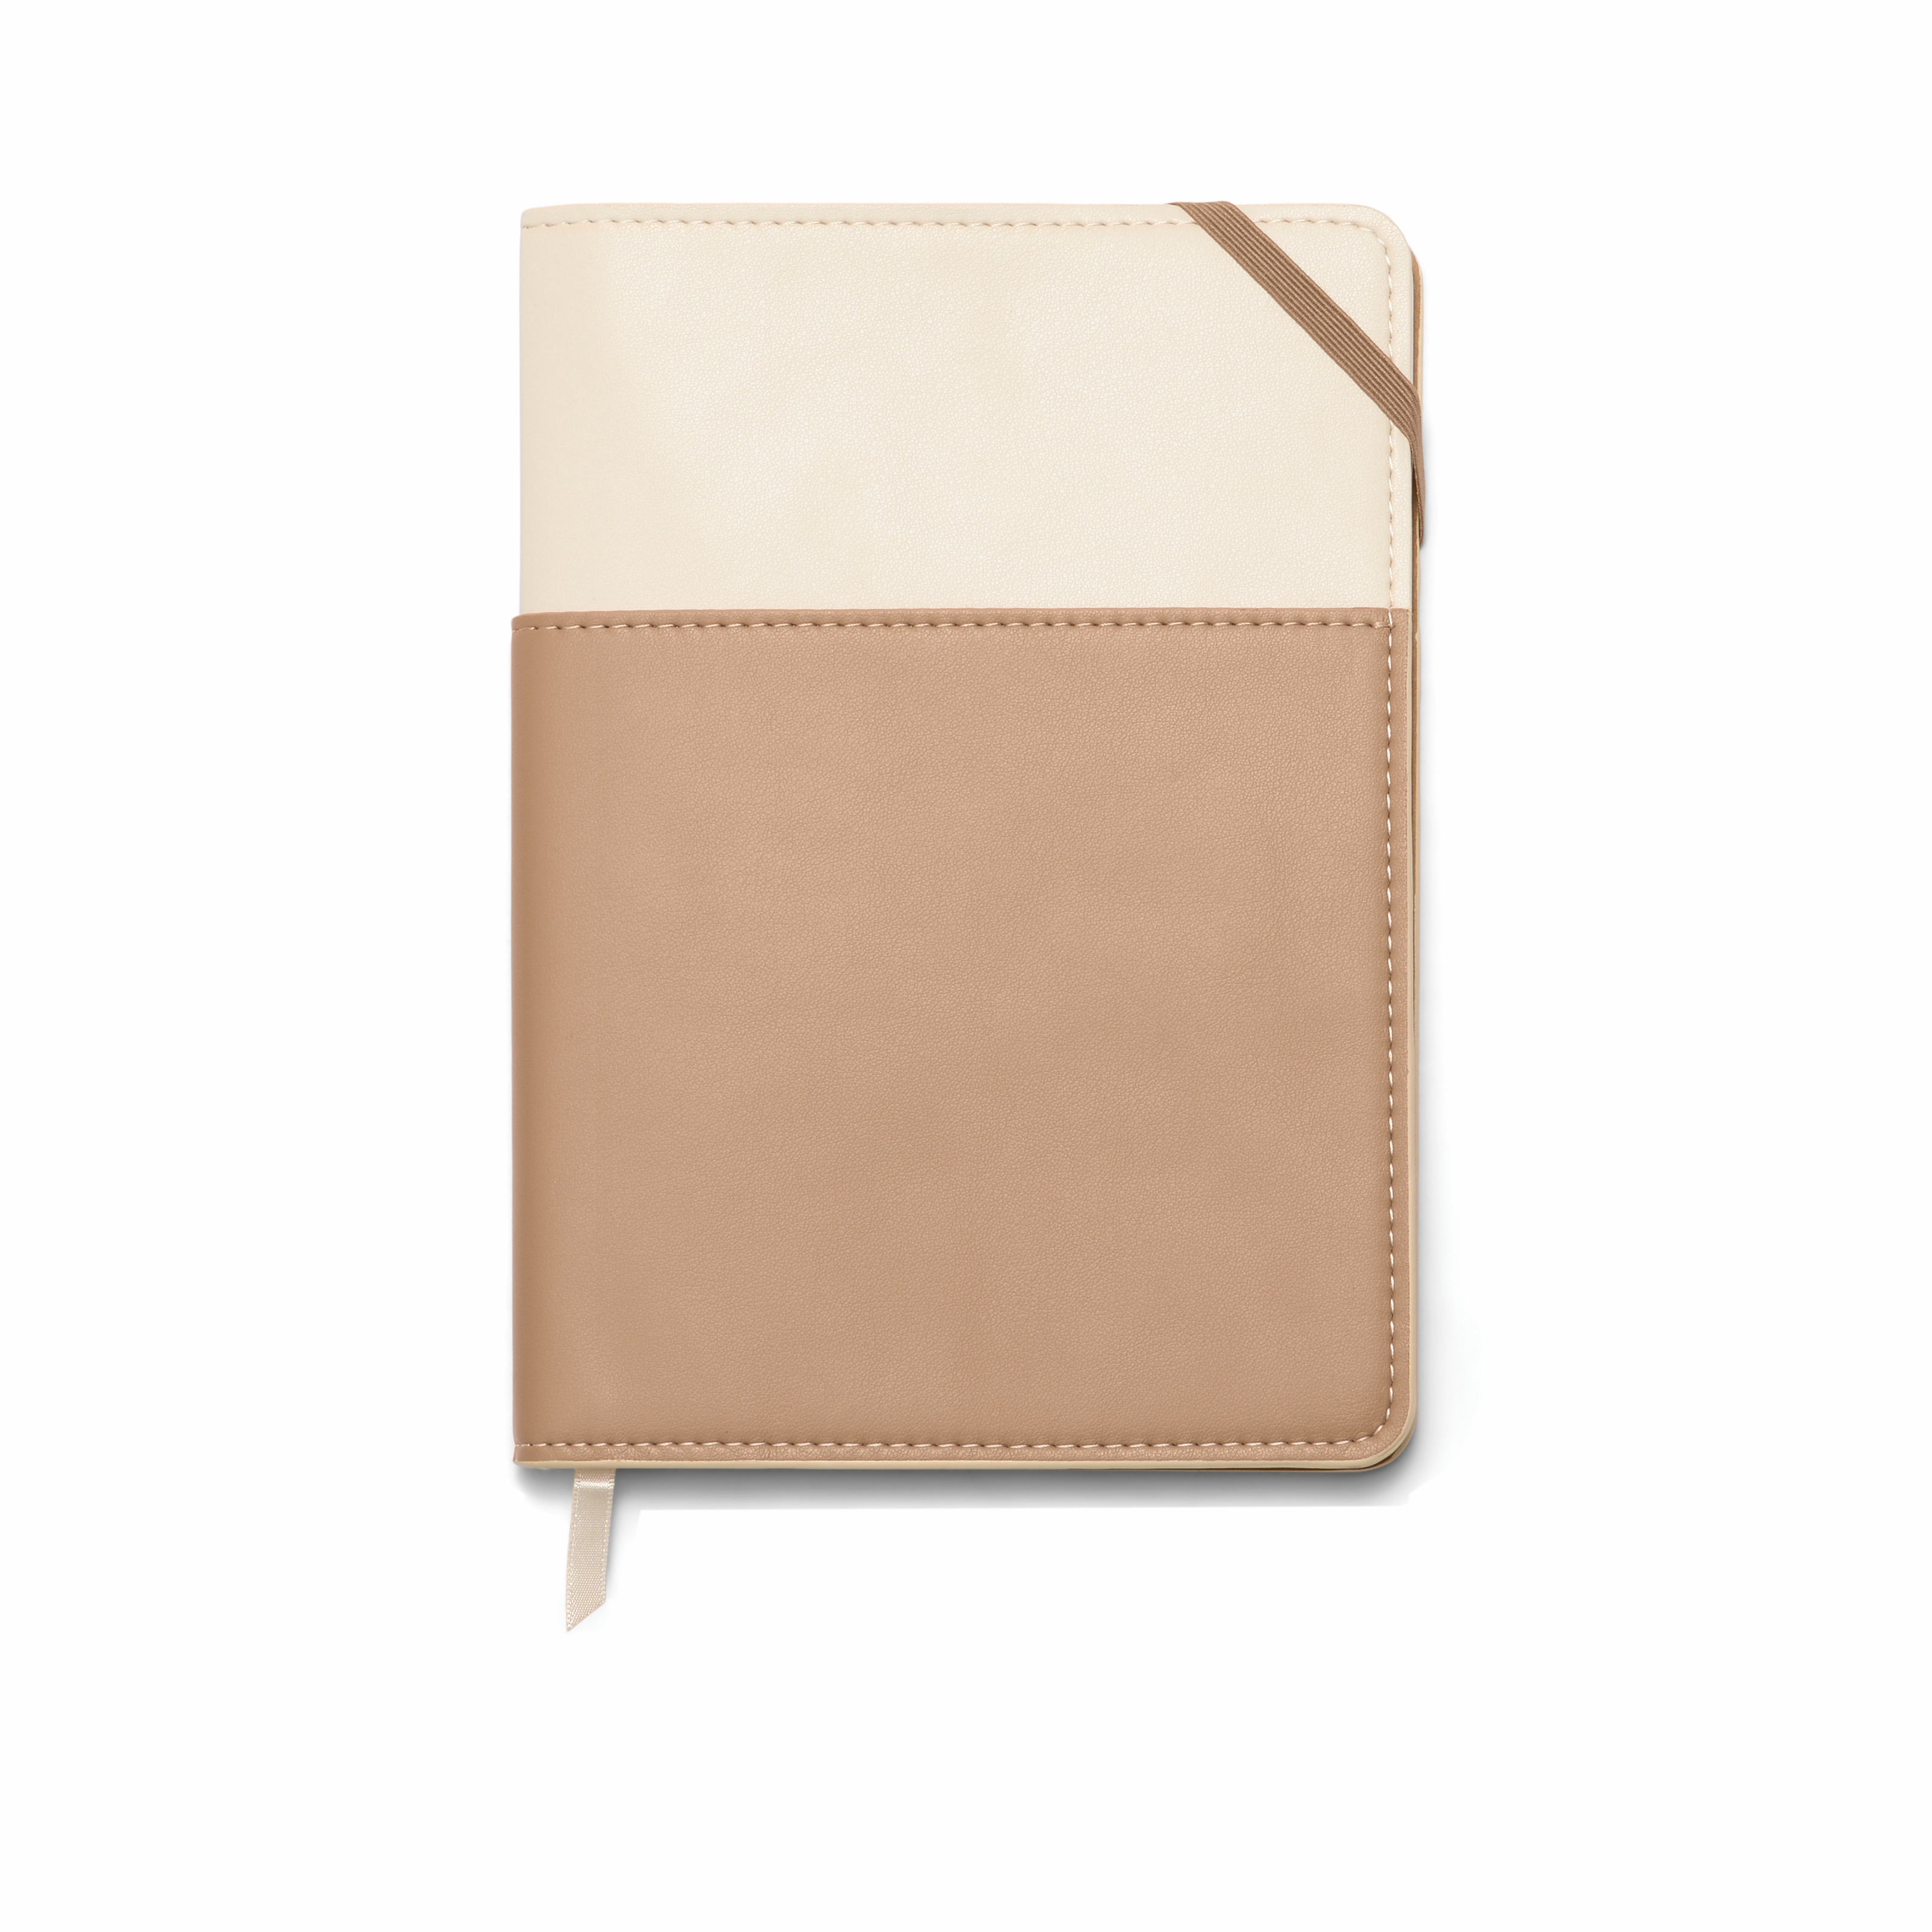 Notebook with pocket Beige Offwhite